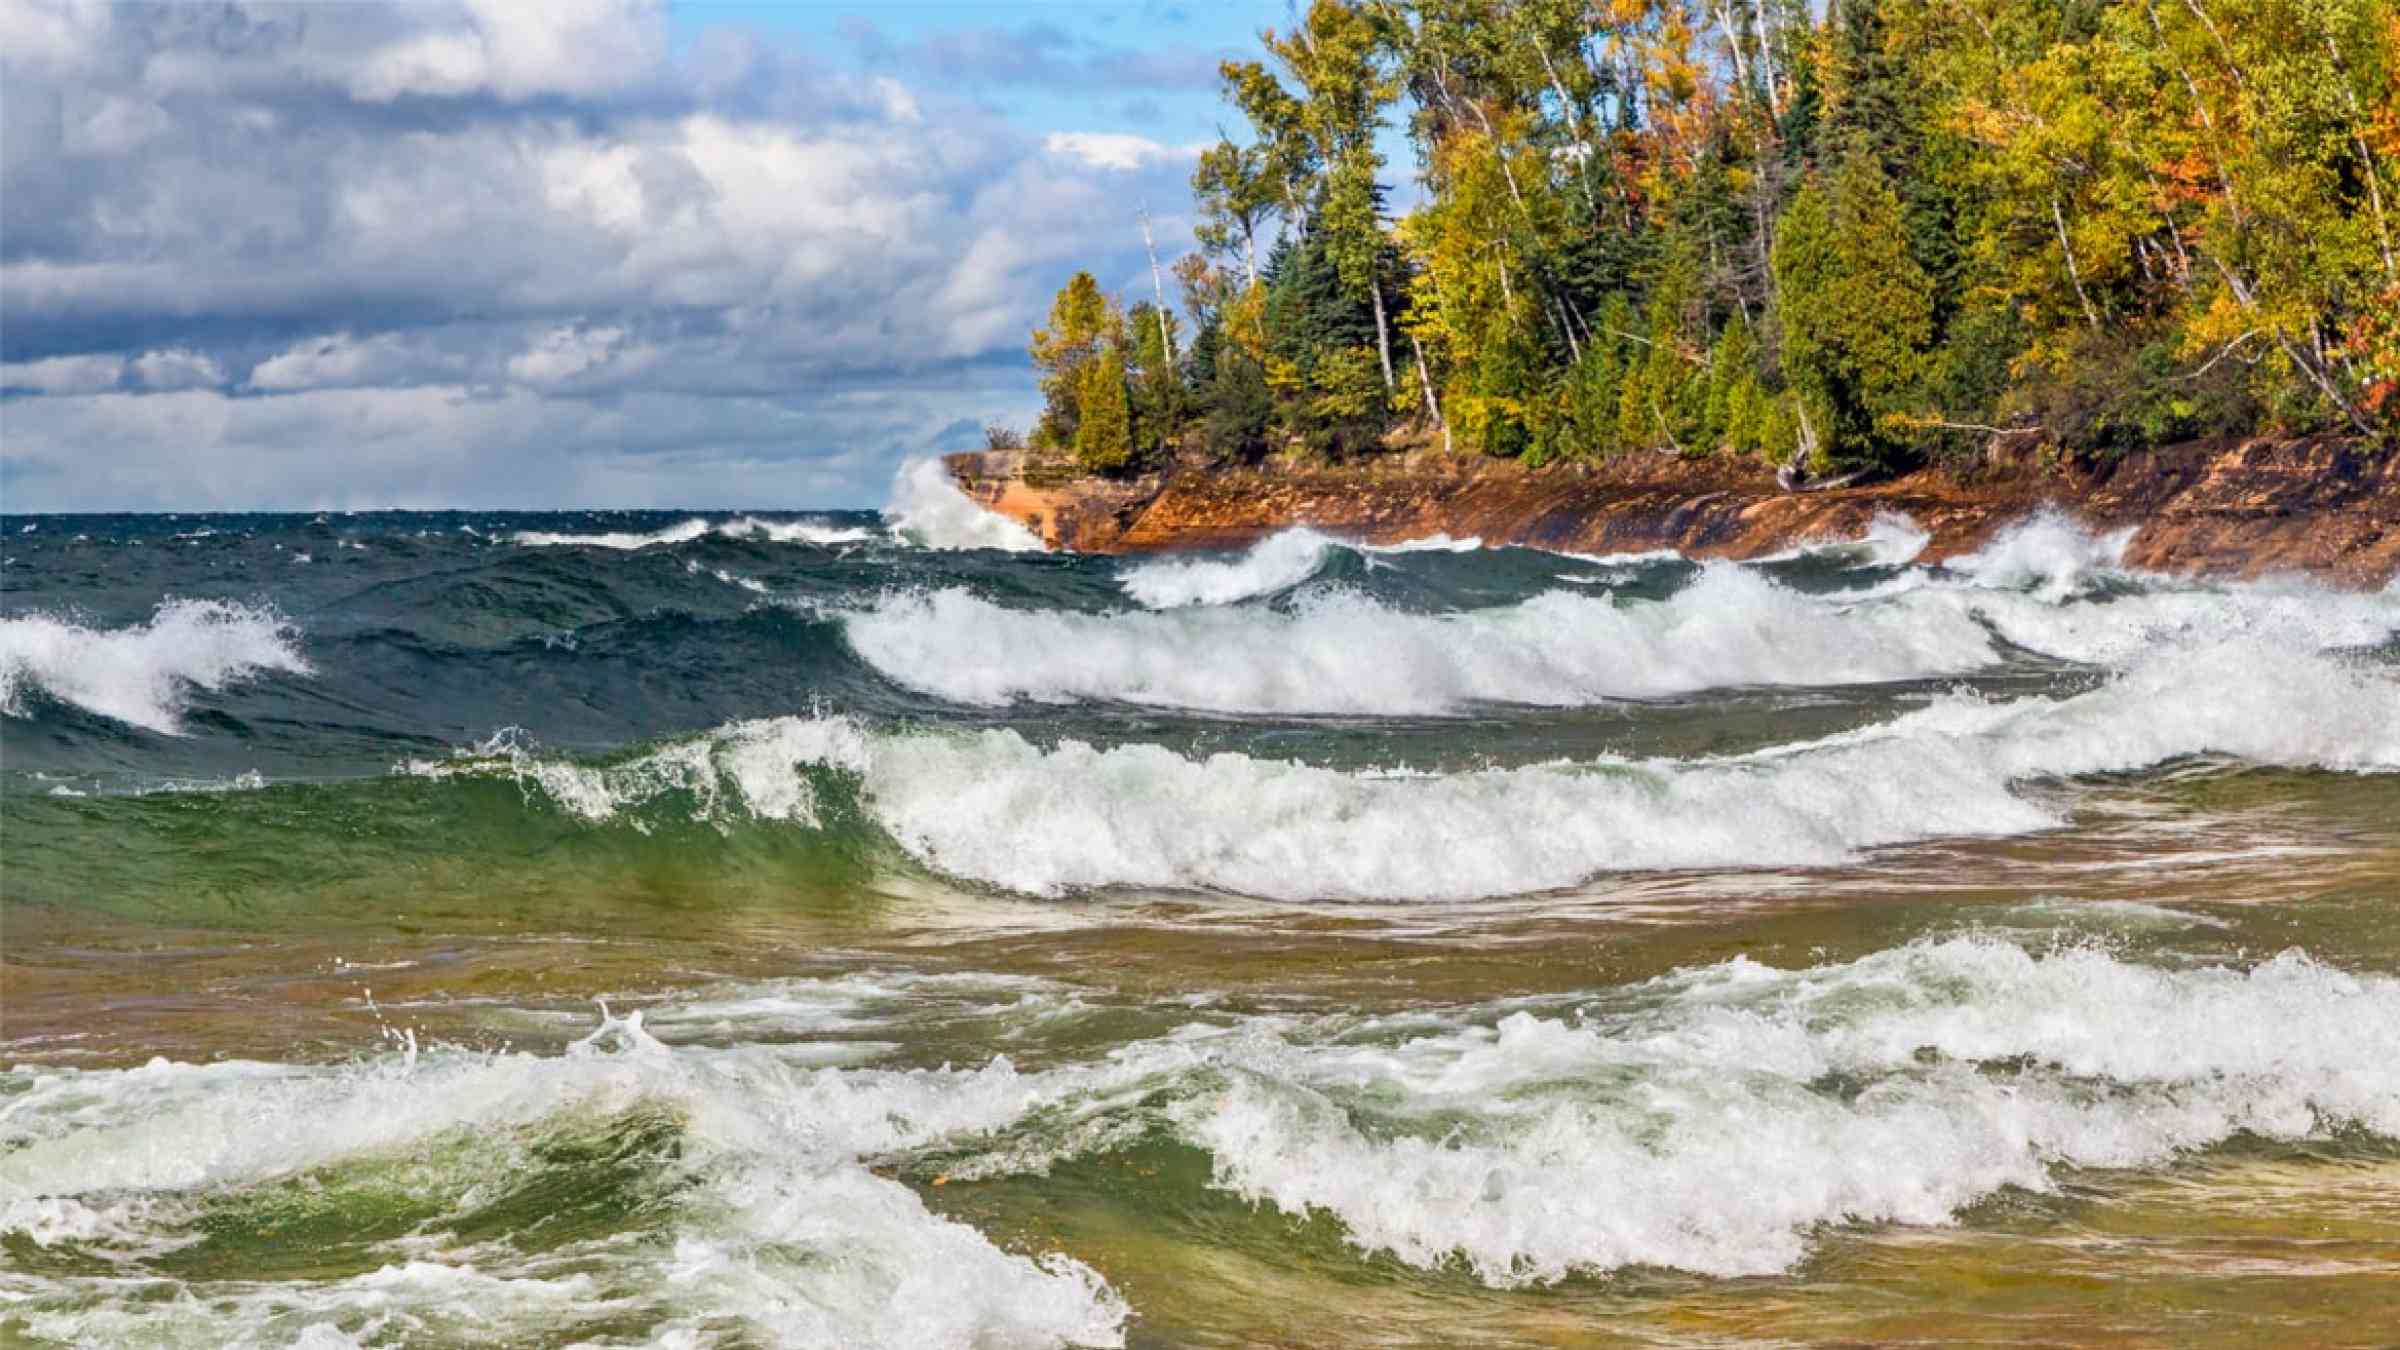 Waves crash on the rocky coast of Lake Superior at Michigan's Pictured Rocks National Lakeshore in autumn (USA)